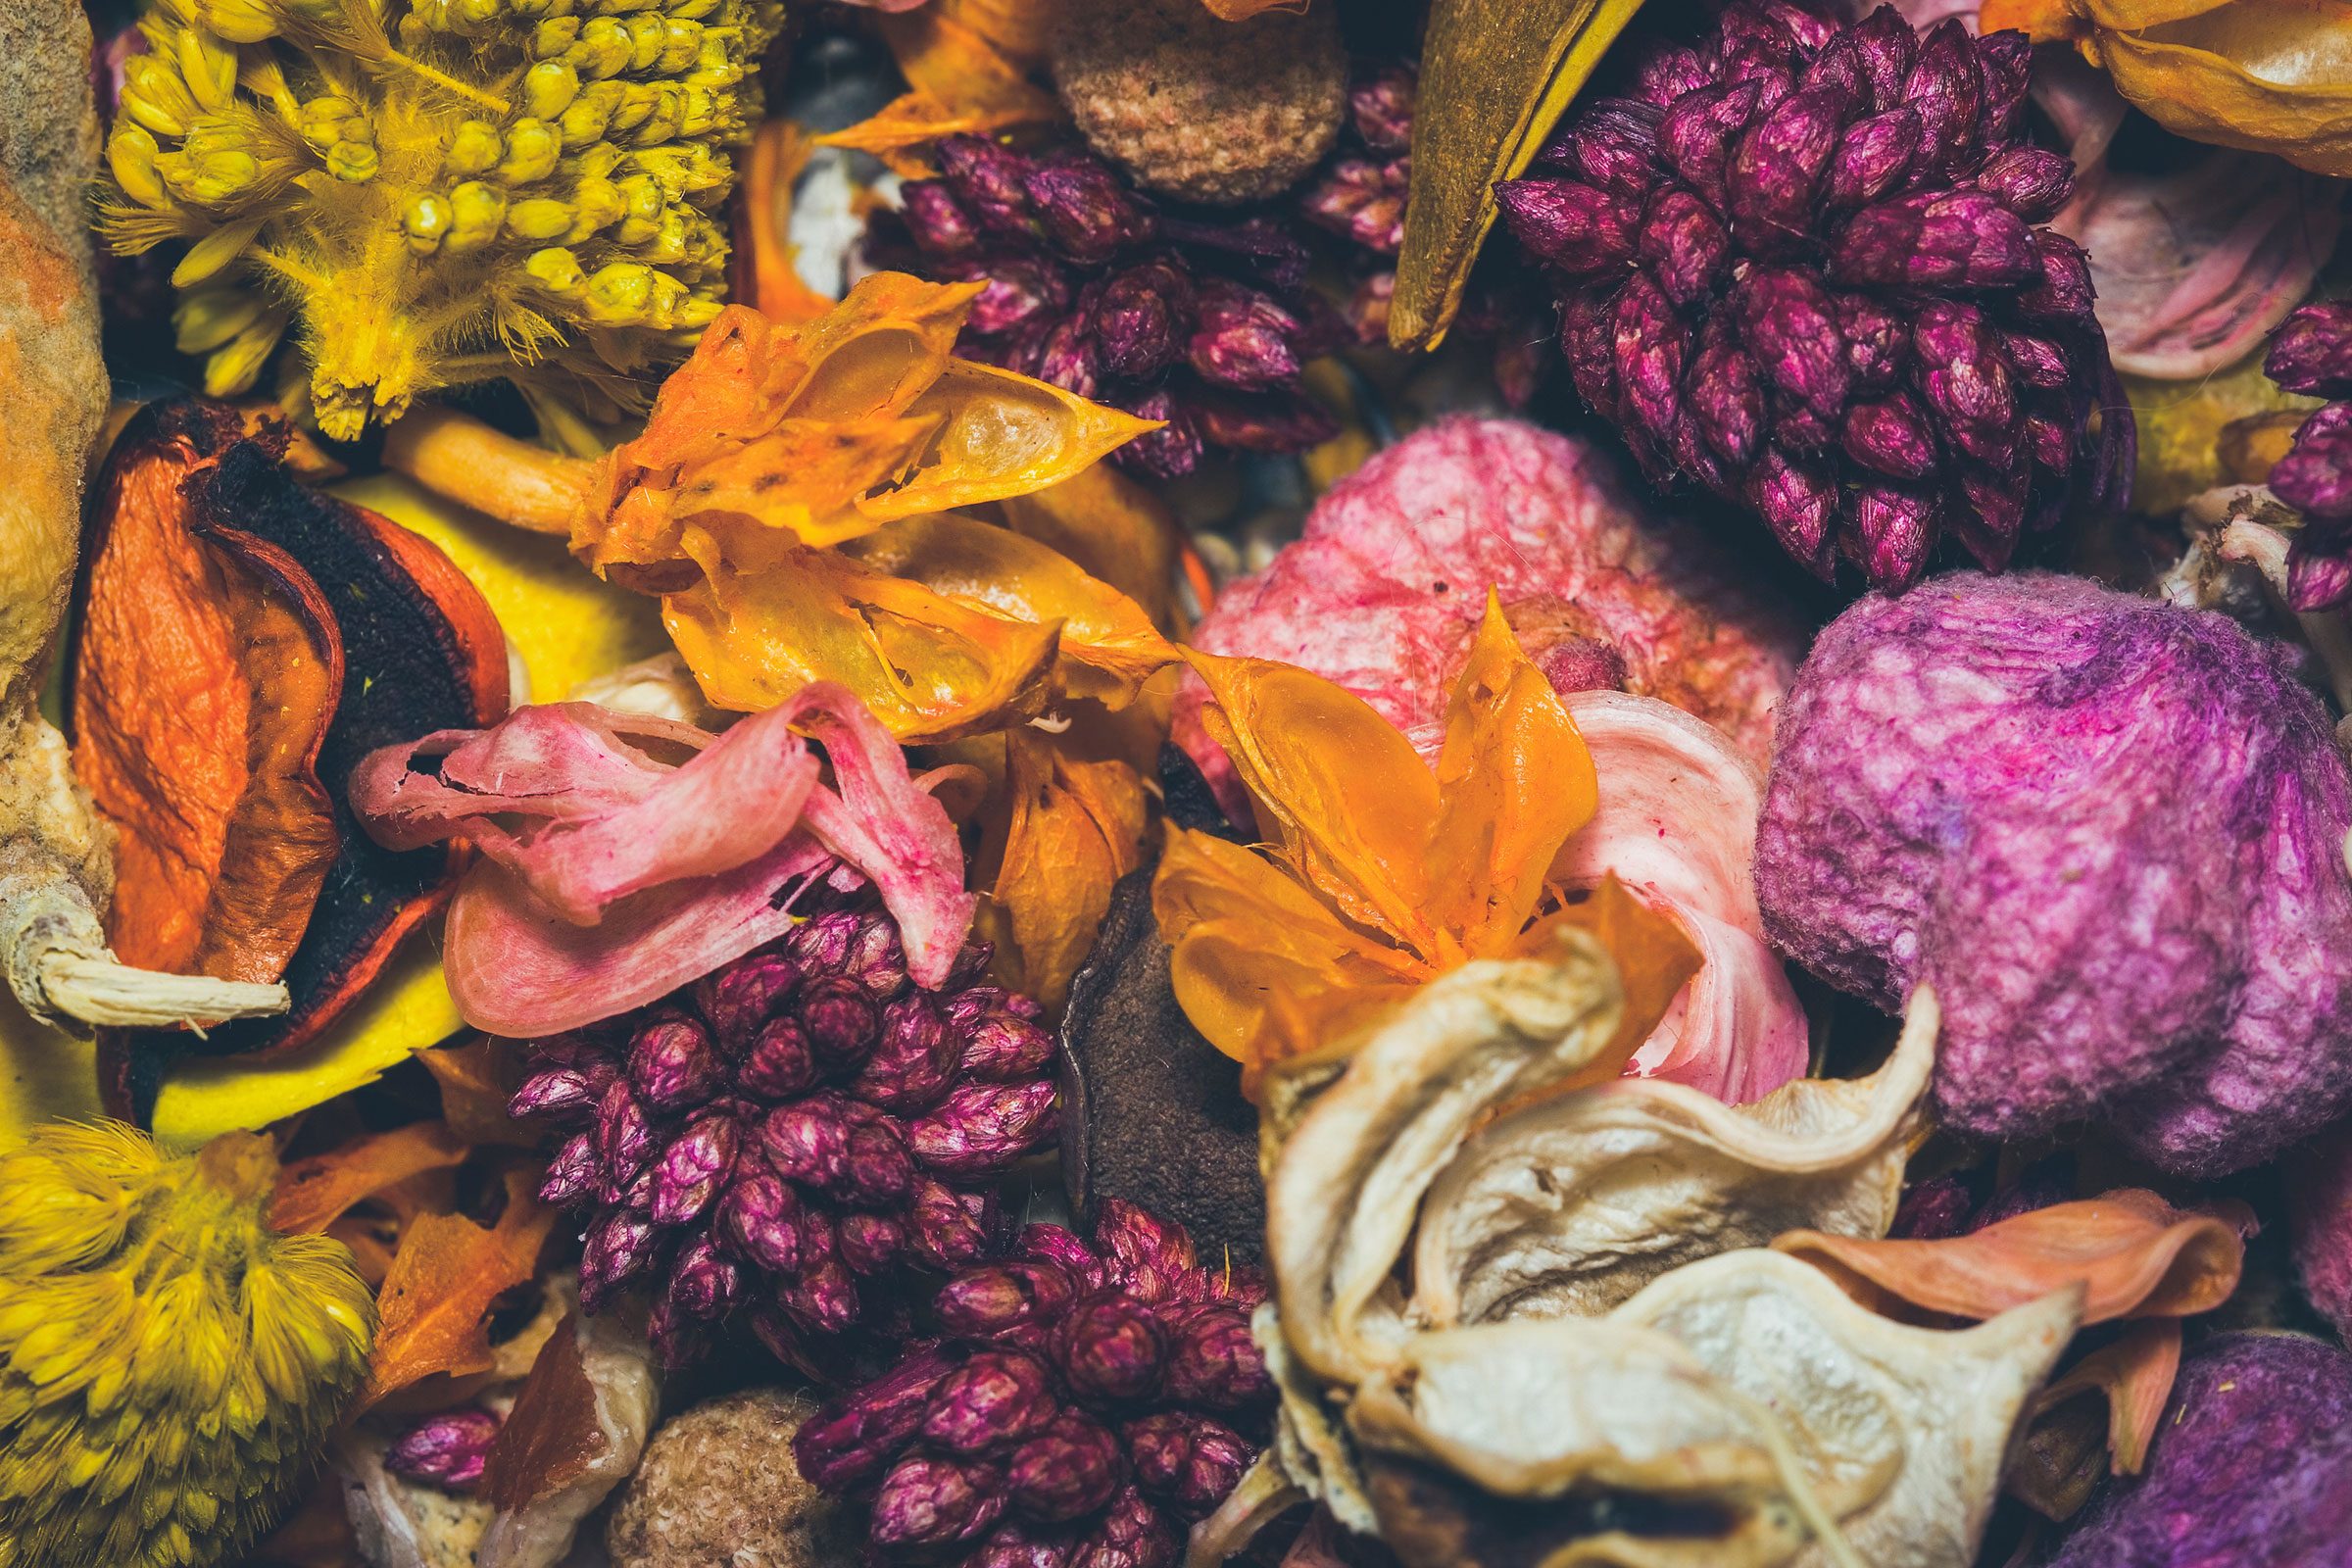 How to Frame Dried Flowers, According to a Pro Florist